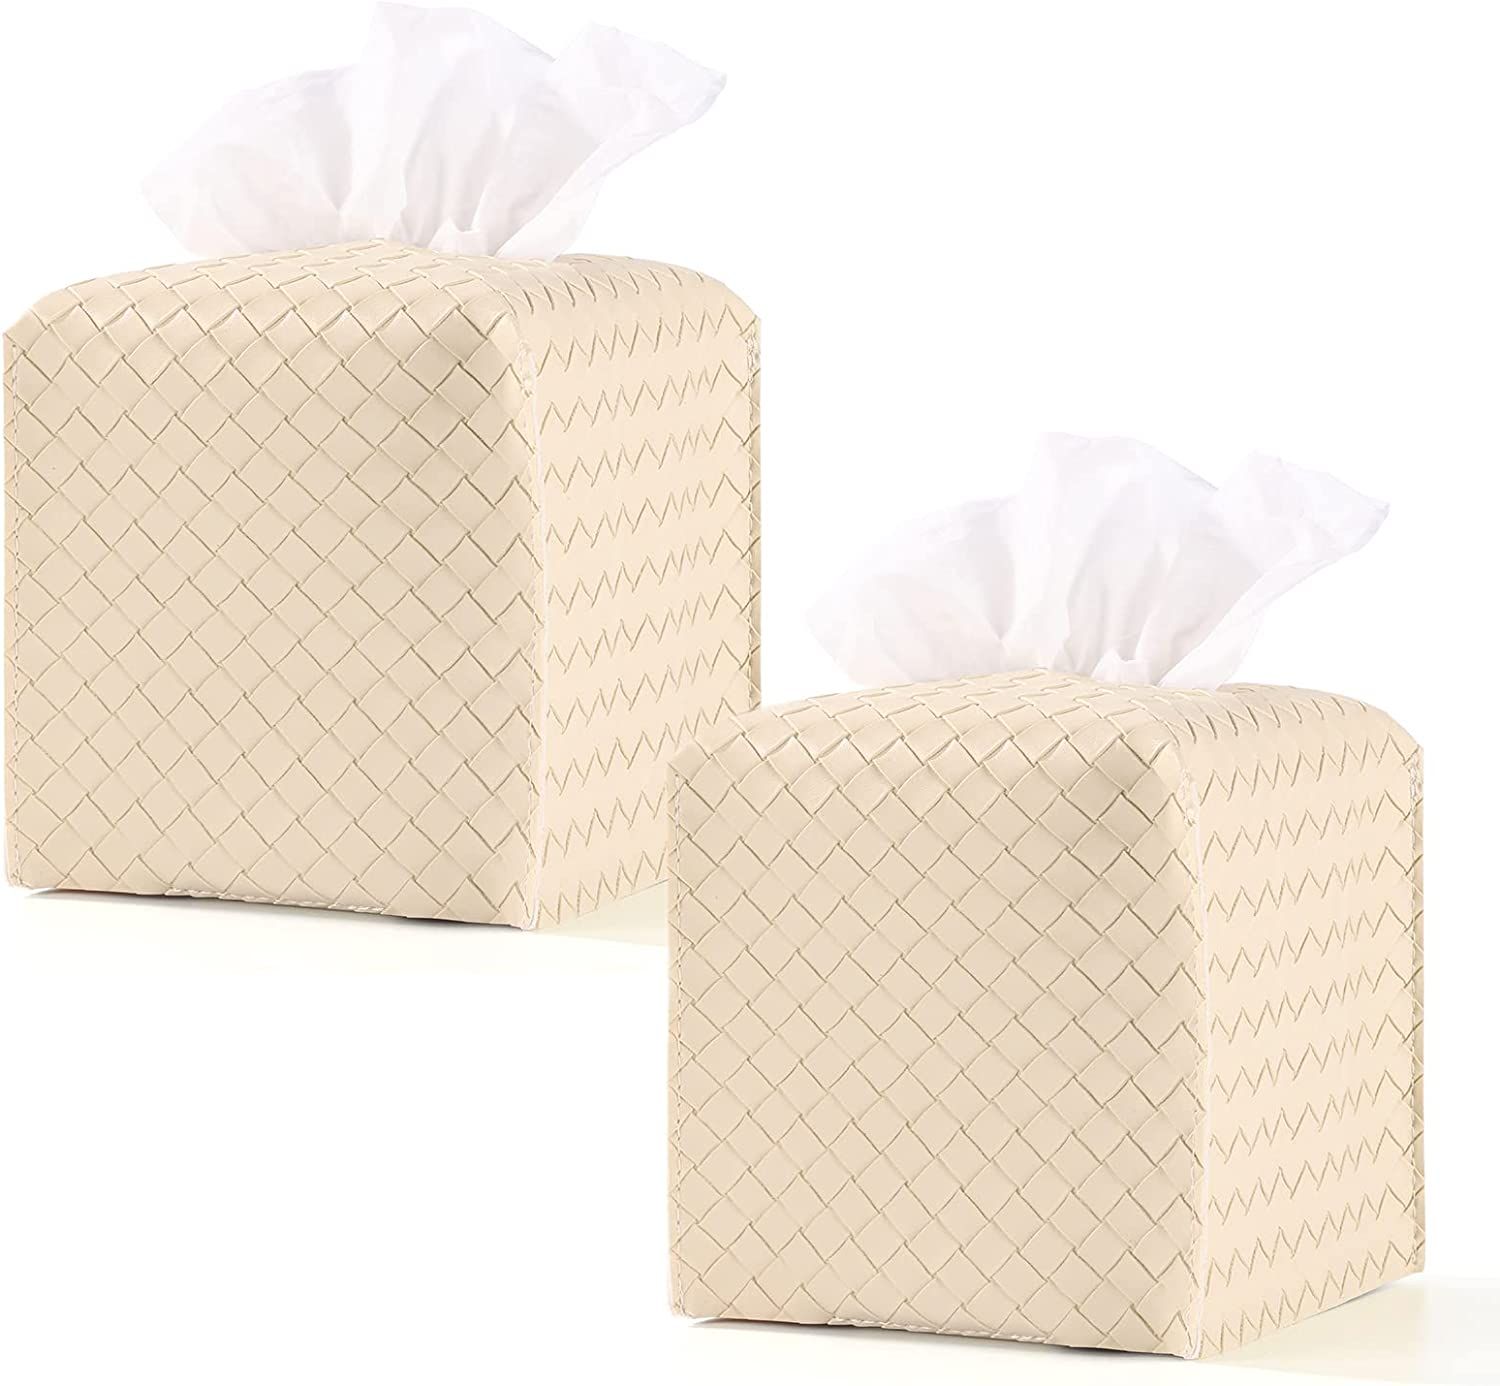 LURRIER 2 Pack Tissue Box Cover, Modern Woven PU Leather Square Tissue Box Holder, Decorative Box... | Amazon (US)